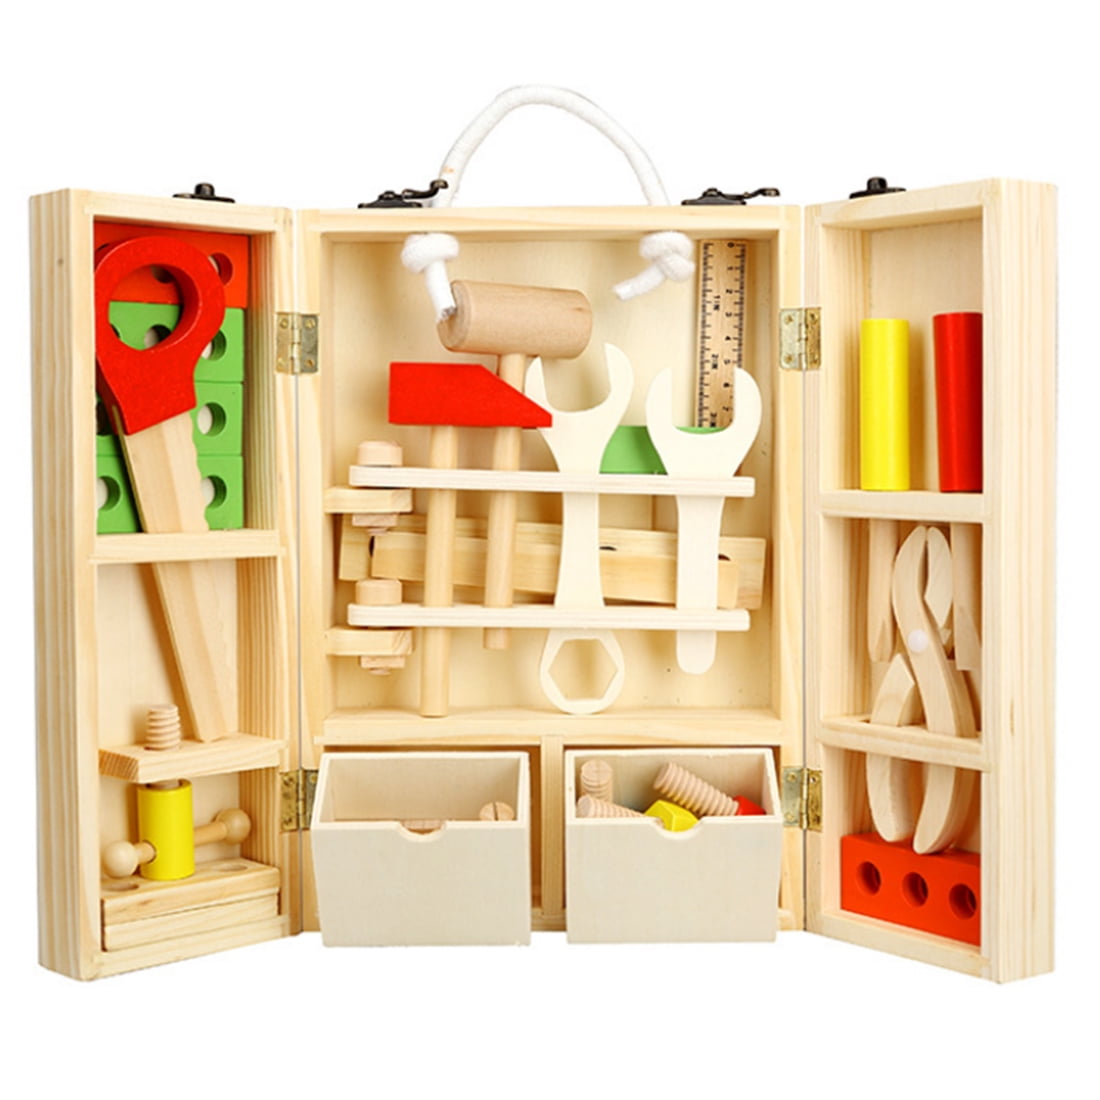 Wooden toy tools